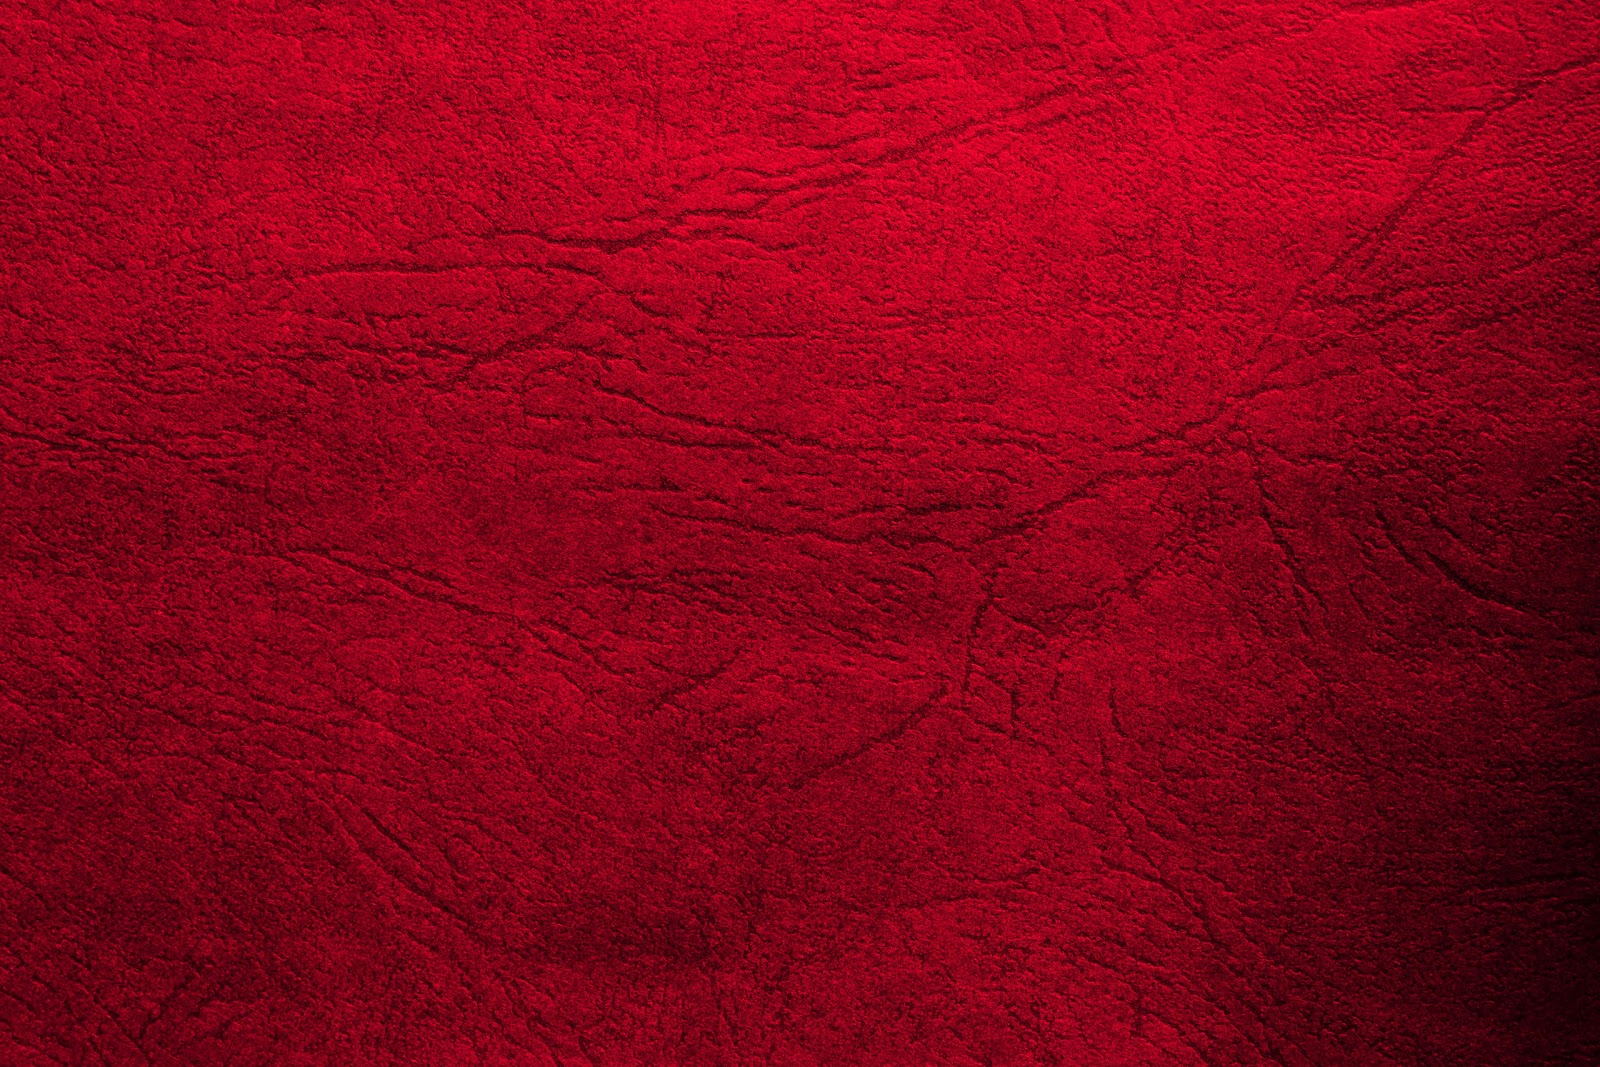 Wallpaper Backgrounds Red Texture Wallpapers